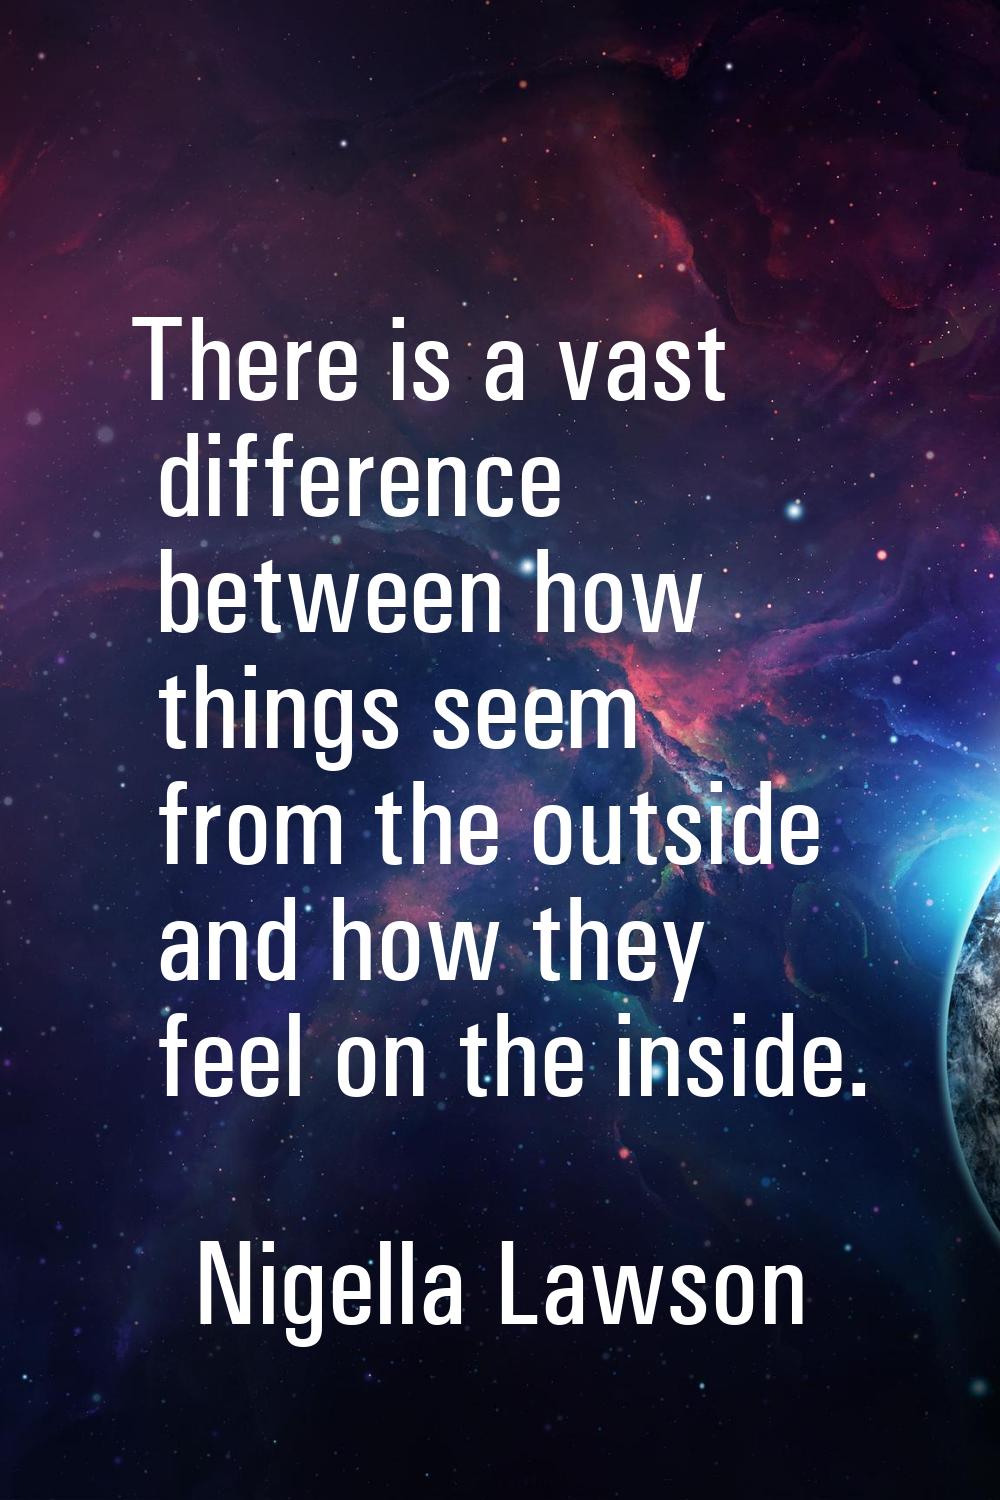 There is a vast difference between how things seem from the outside and how they feel on the inside